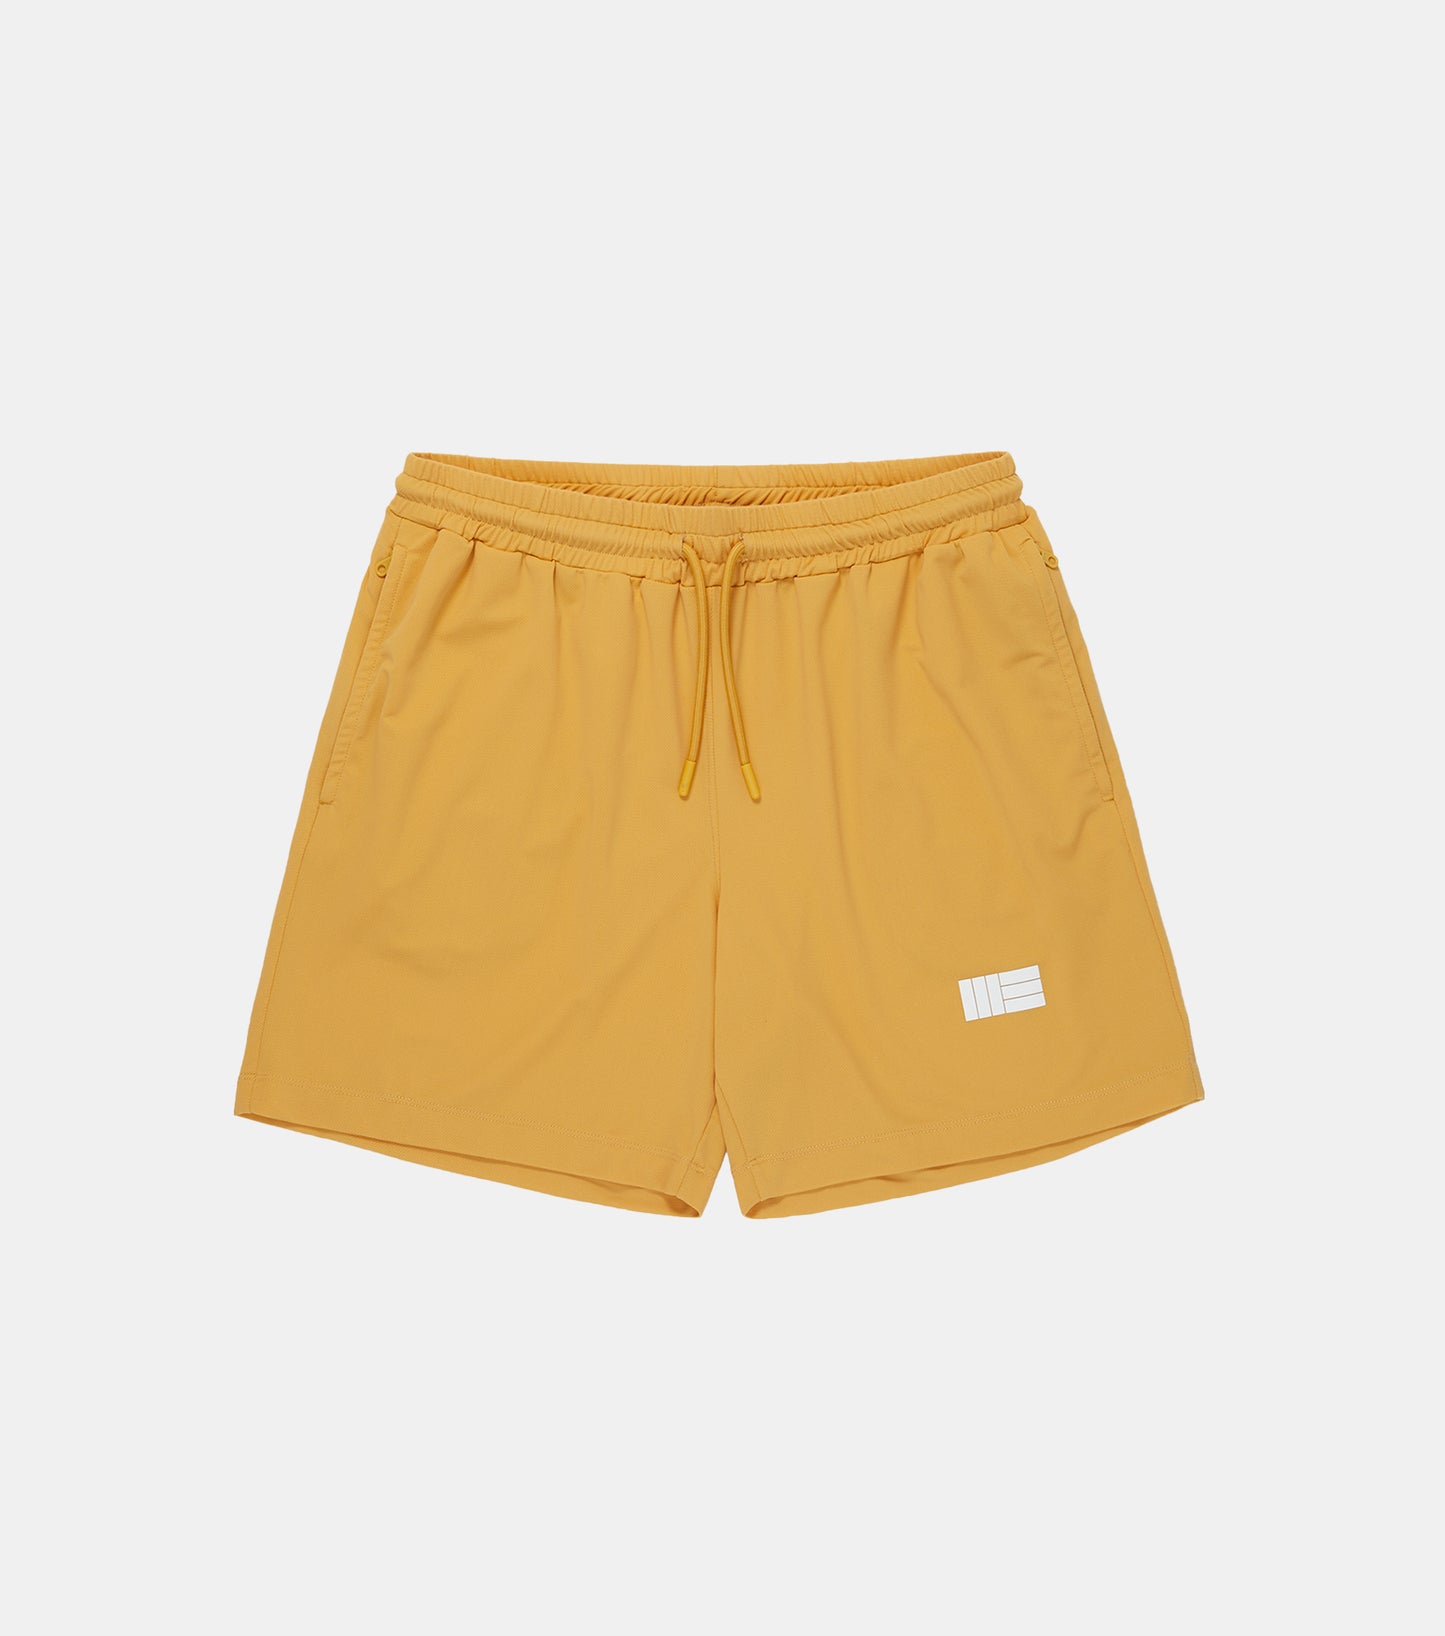 Mens Premium Athletic Sport Shorts Made in NYC - Yellow